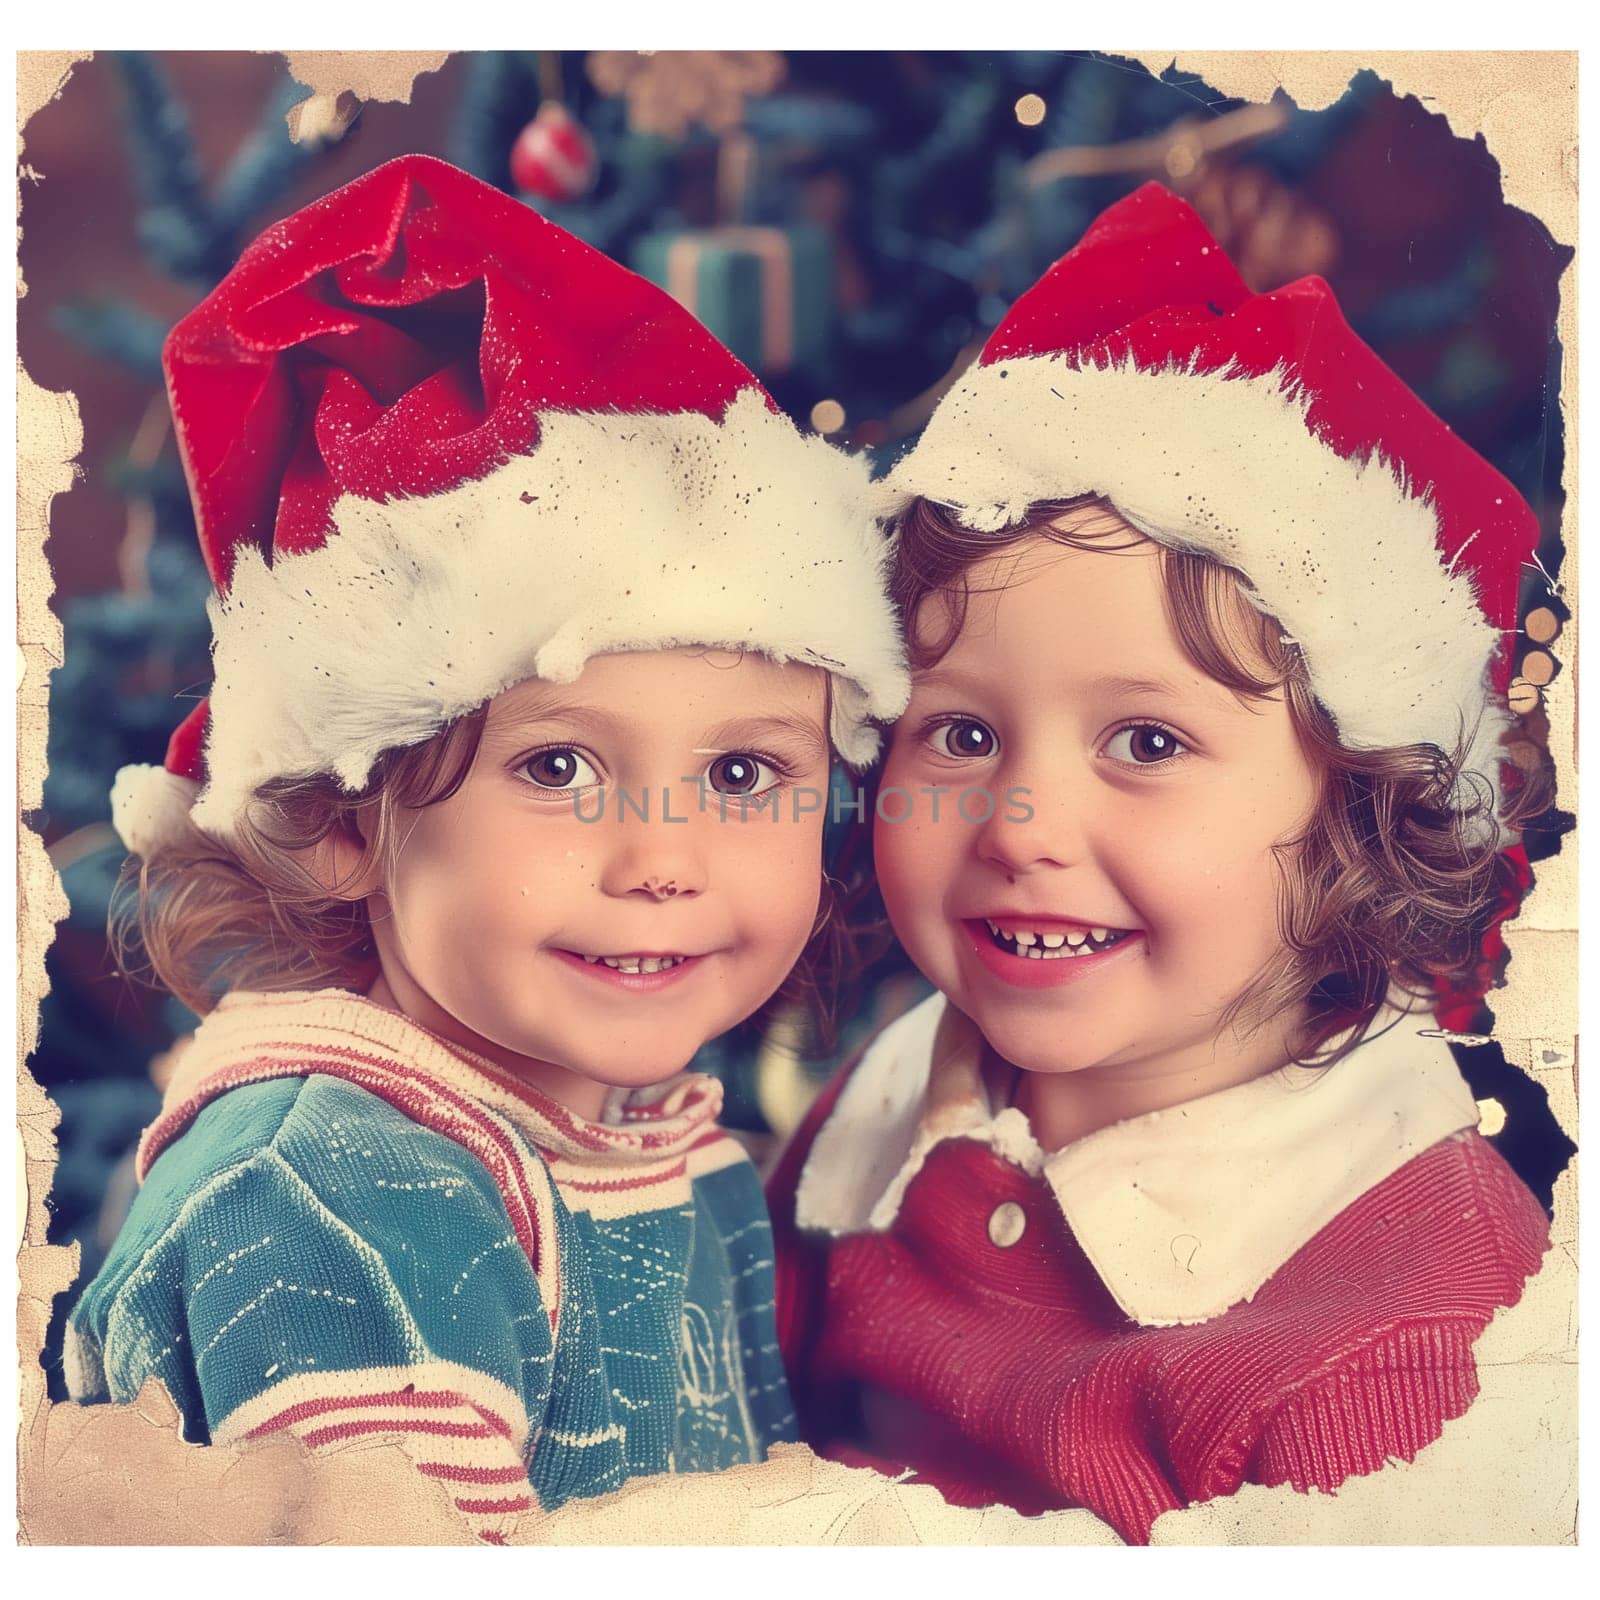 Childs in christmas hats old fashioned photo by Dustick